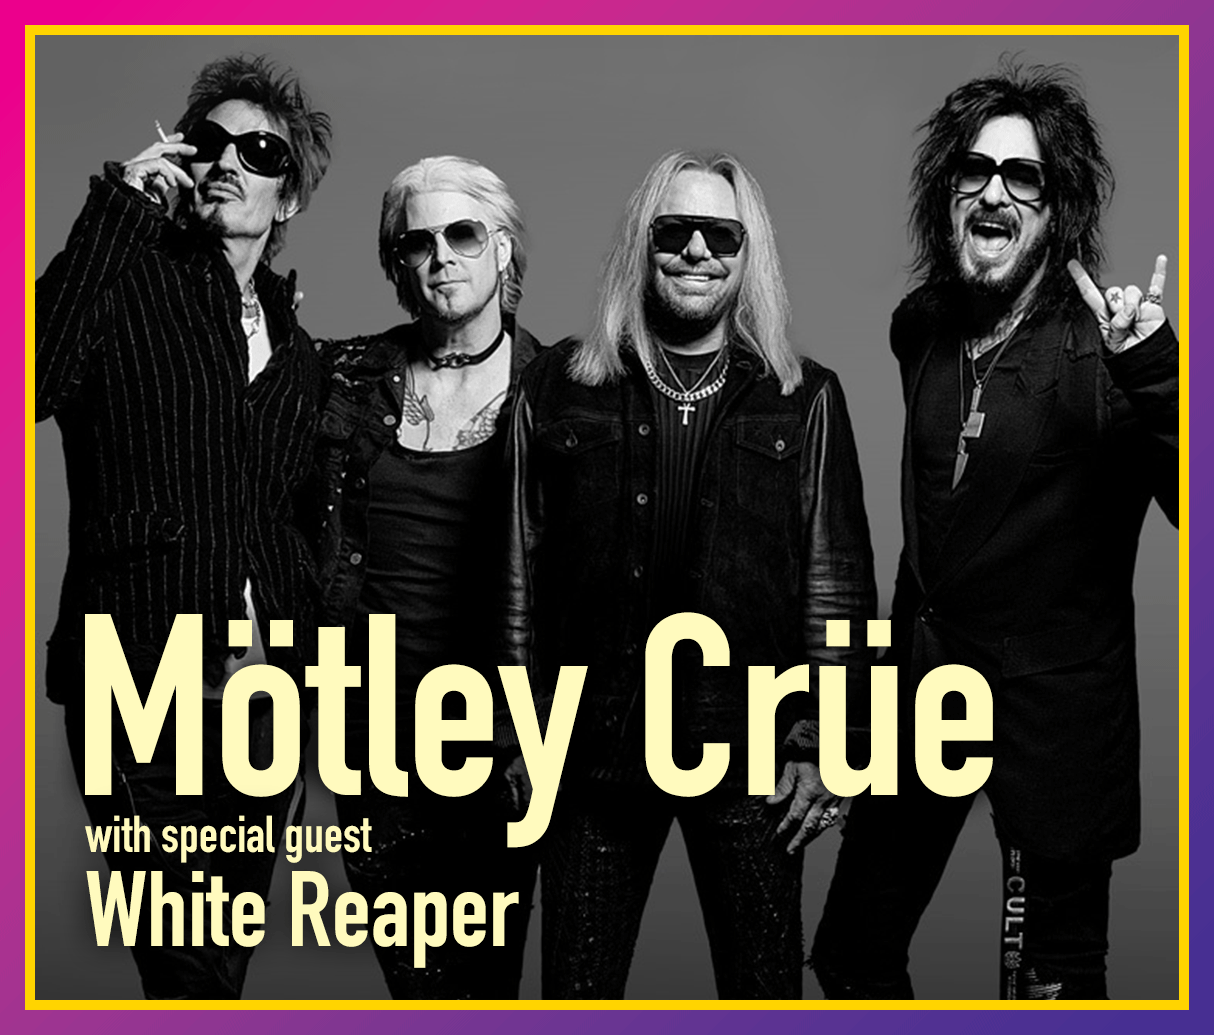 Mötley Crüe with special guest White Reaper